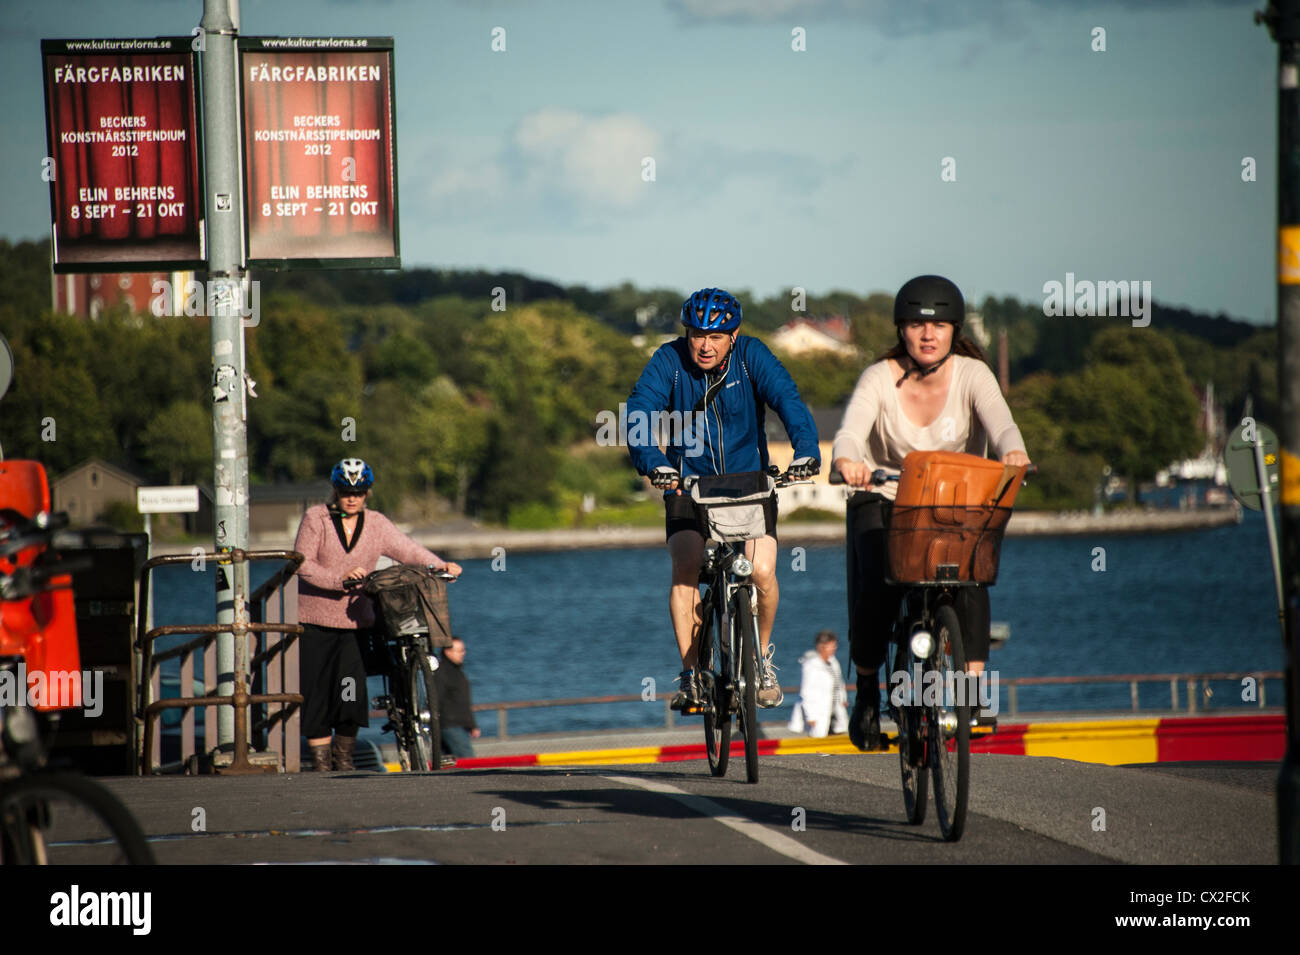 Communters on bicycles passing Gamla Stan The Old Town and Slussen In Stockholm Stock Photo